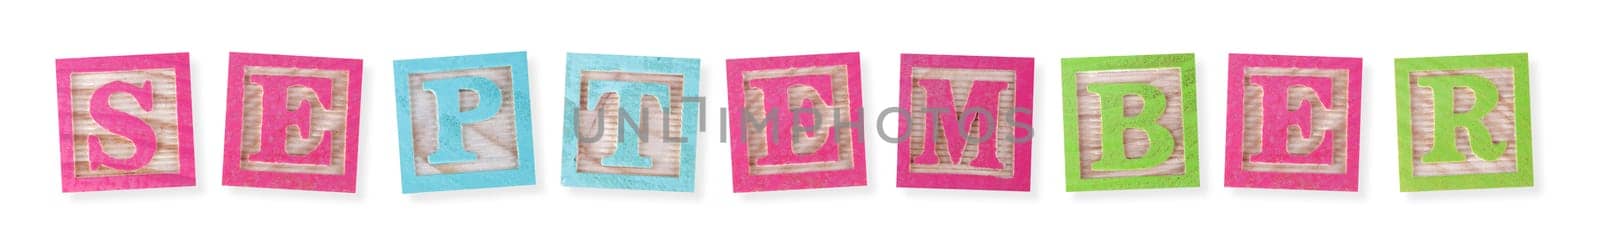 September concept with wood blocks by VivacityImages